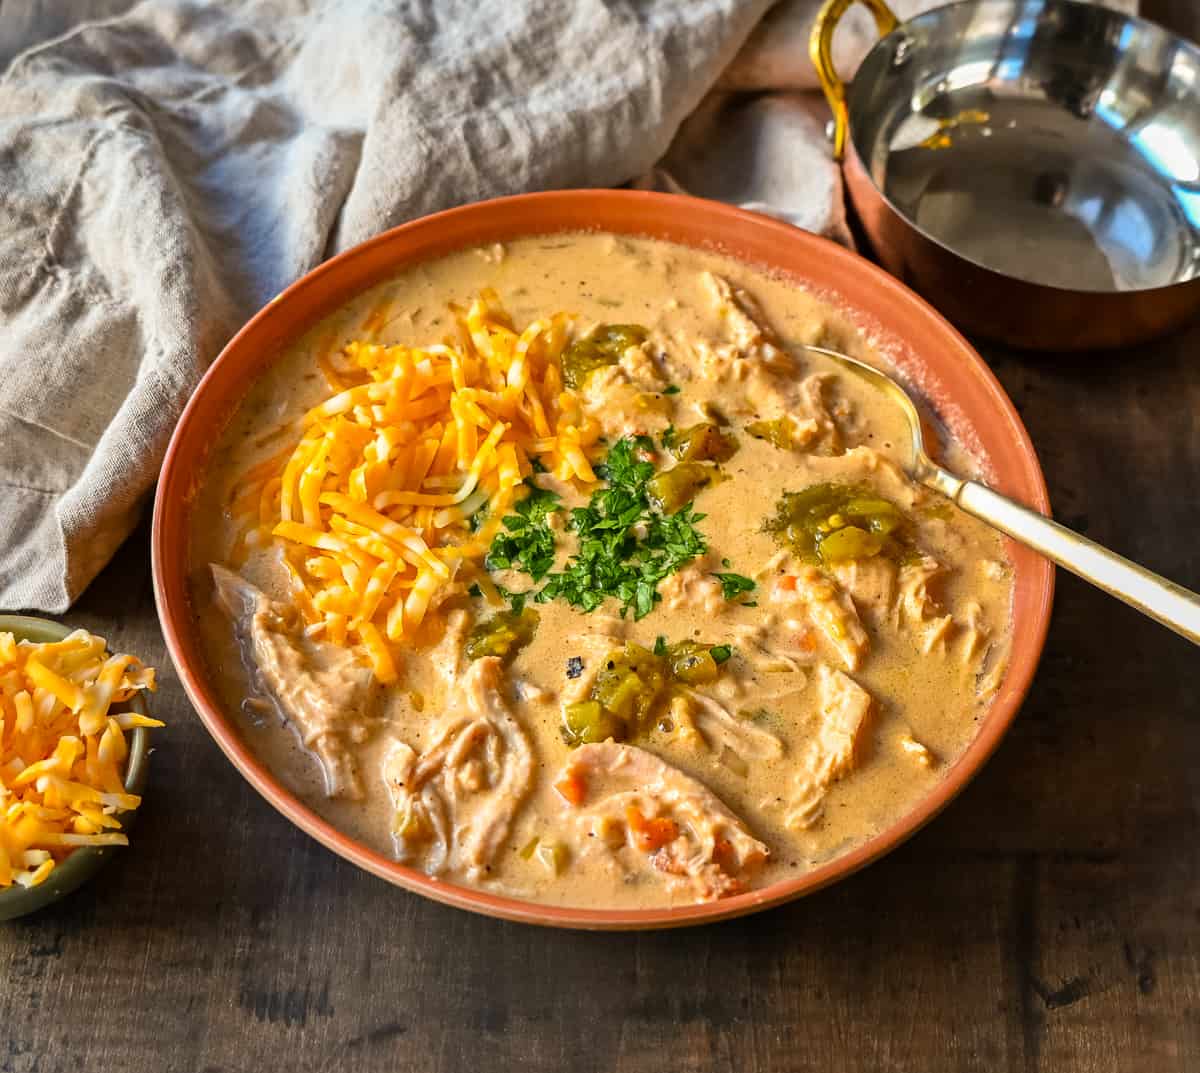 Rich, cheesy chicken queso soup made with three types of cheeses, tender chicken, green chiles, and spices—all the flavors of cheese queso but in a soup! The creamiest, most flavorful Chicken Cheese Soup.